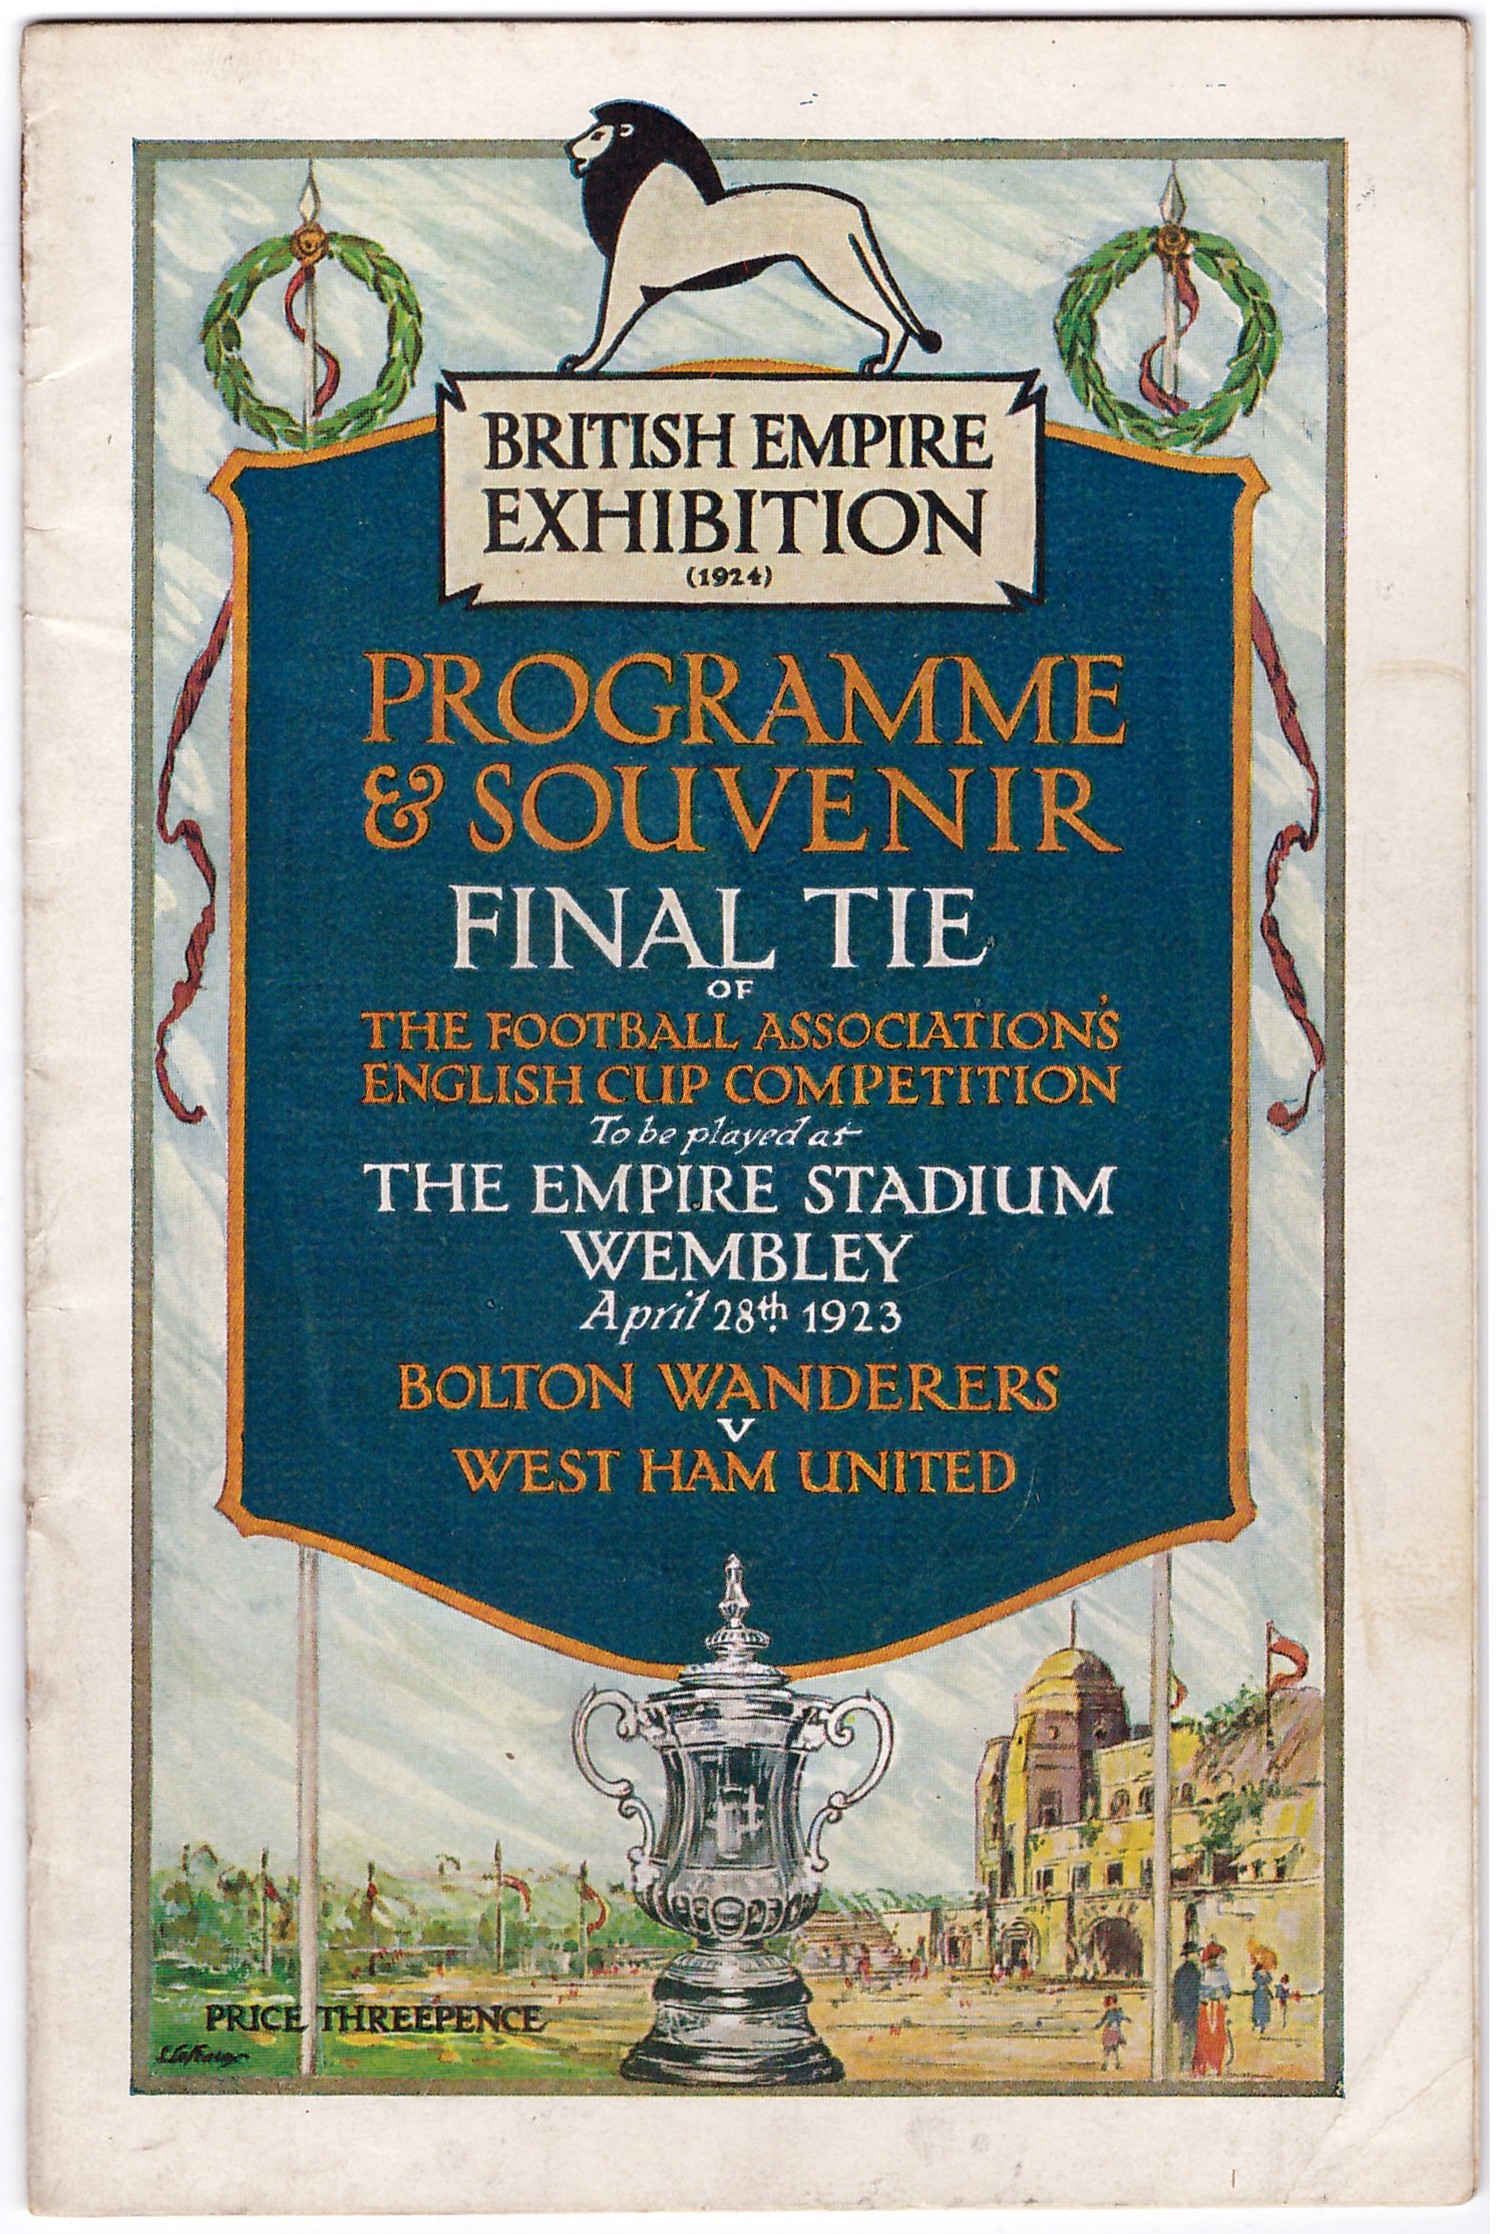 Sport, Football - a souvenir programme for the Football Association Cup Competition Final Tie - Image 2 of 7